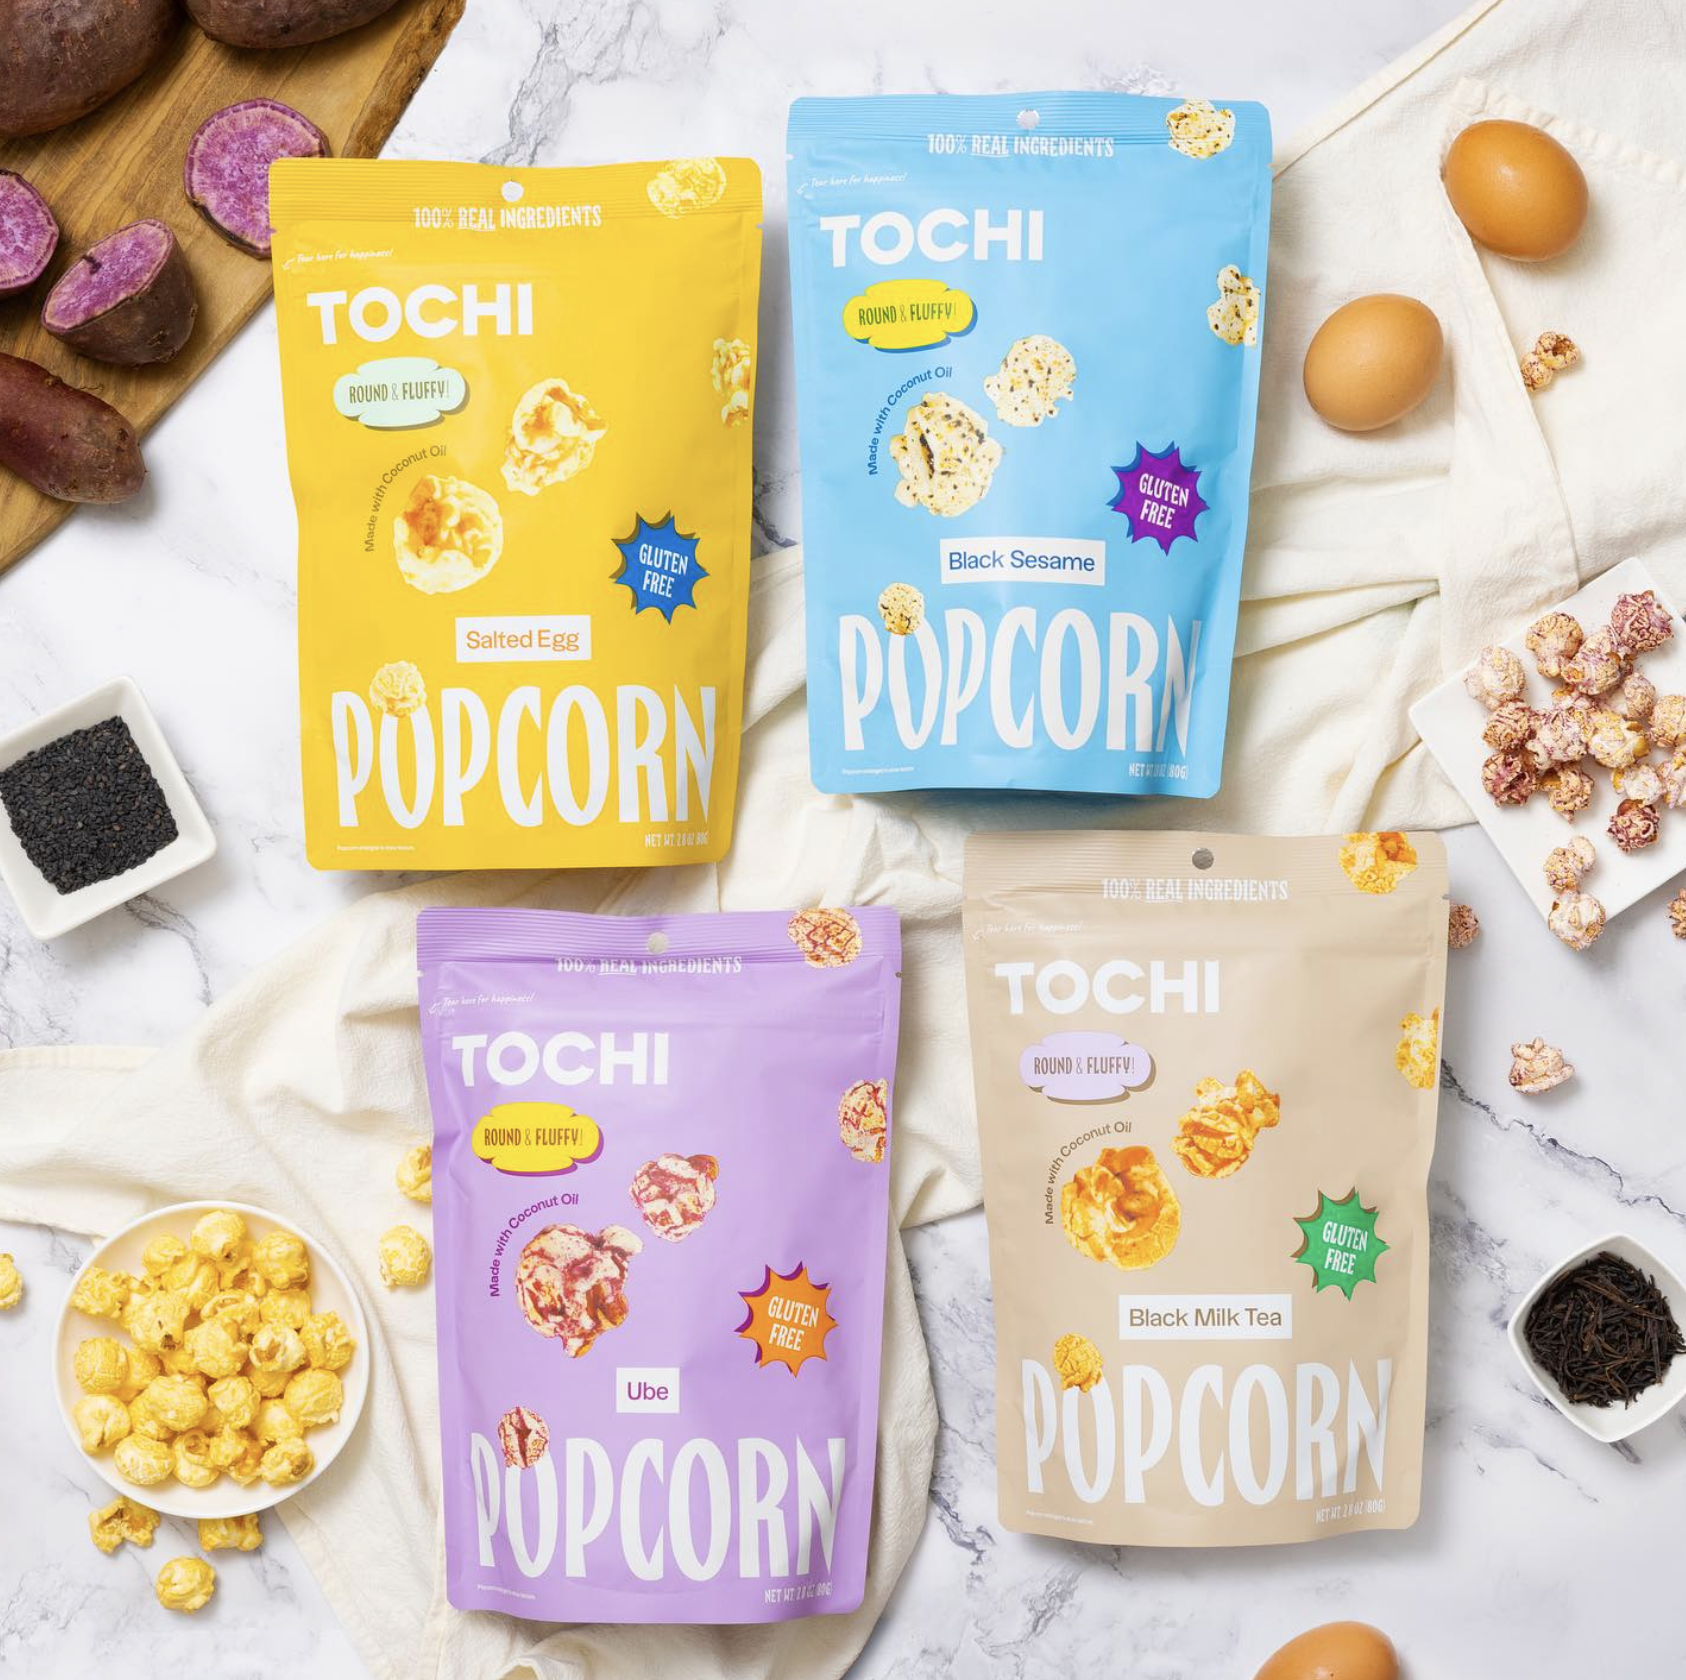 Tochi Popcorn surrounded by ingredients and the popcorn